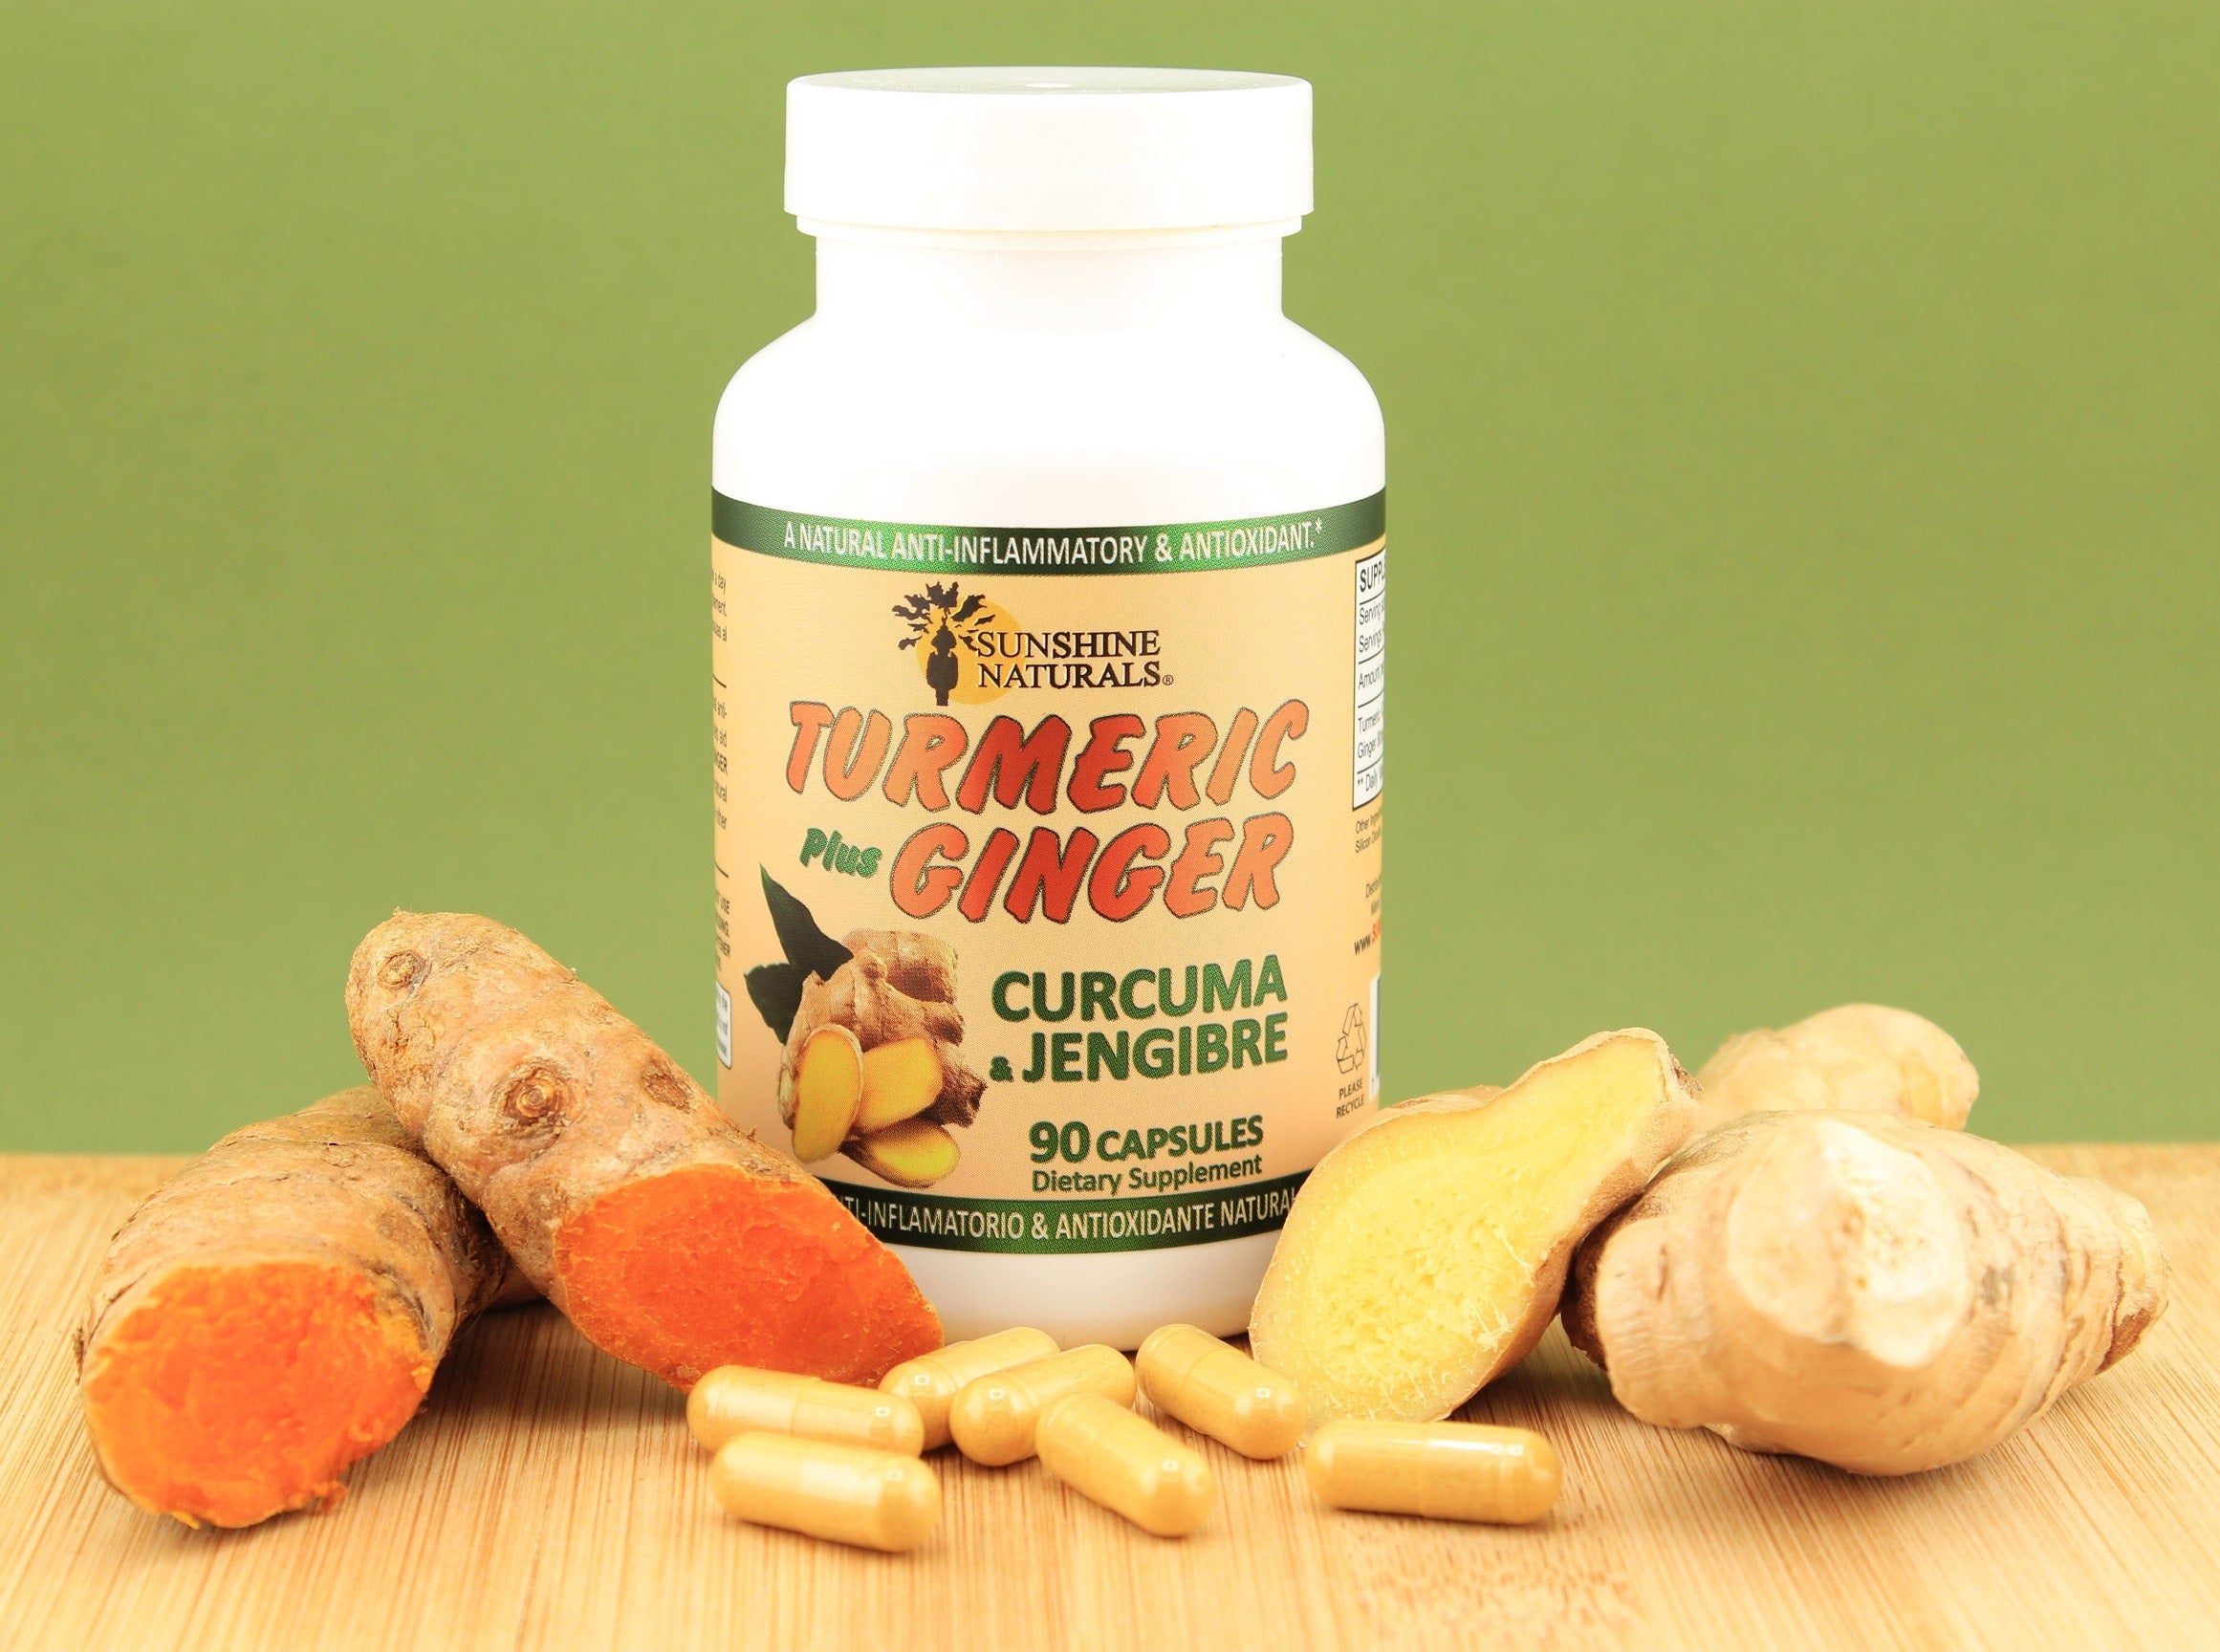 Bottle of Turmeric Supplement suraopunde with natural turmeric and ginger